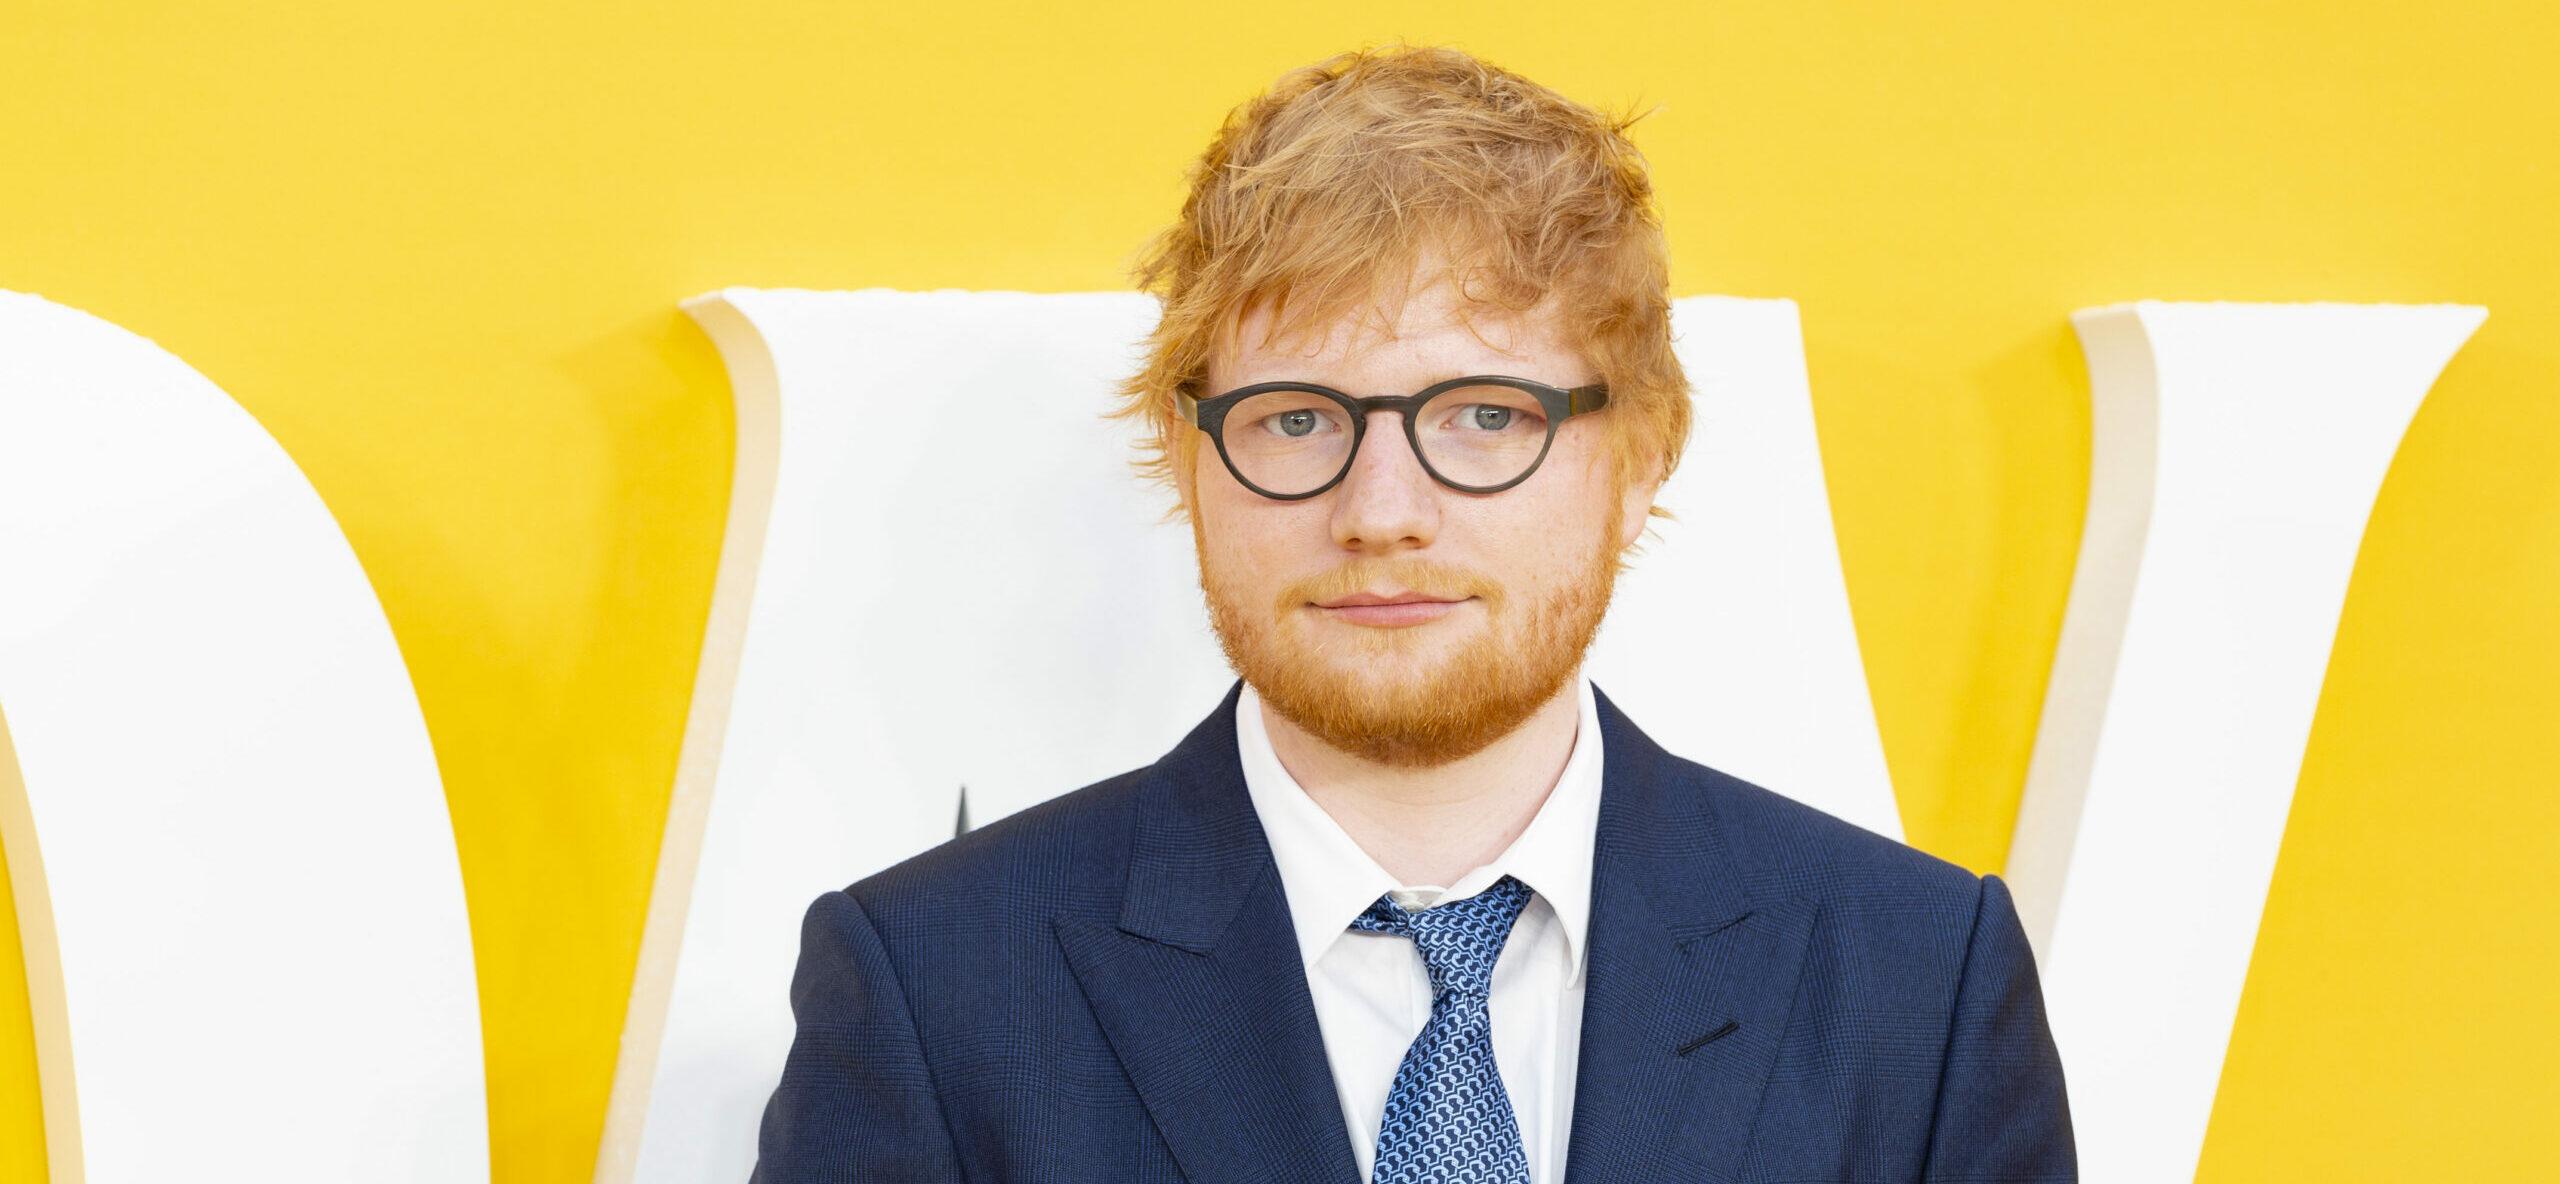 Tearful Ed Sheeran Opens Up About His Wife’s Health Issues And Loss Of His Best Friend